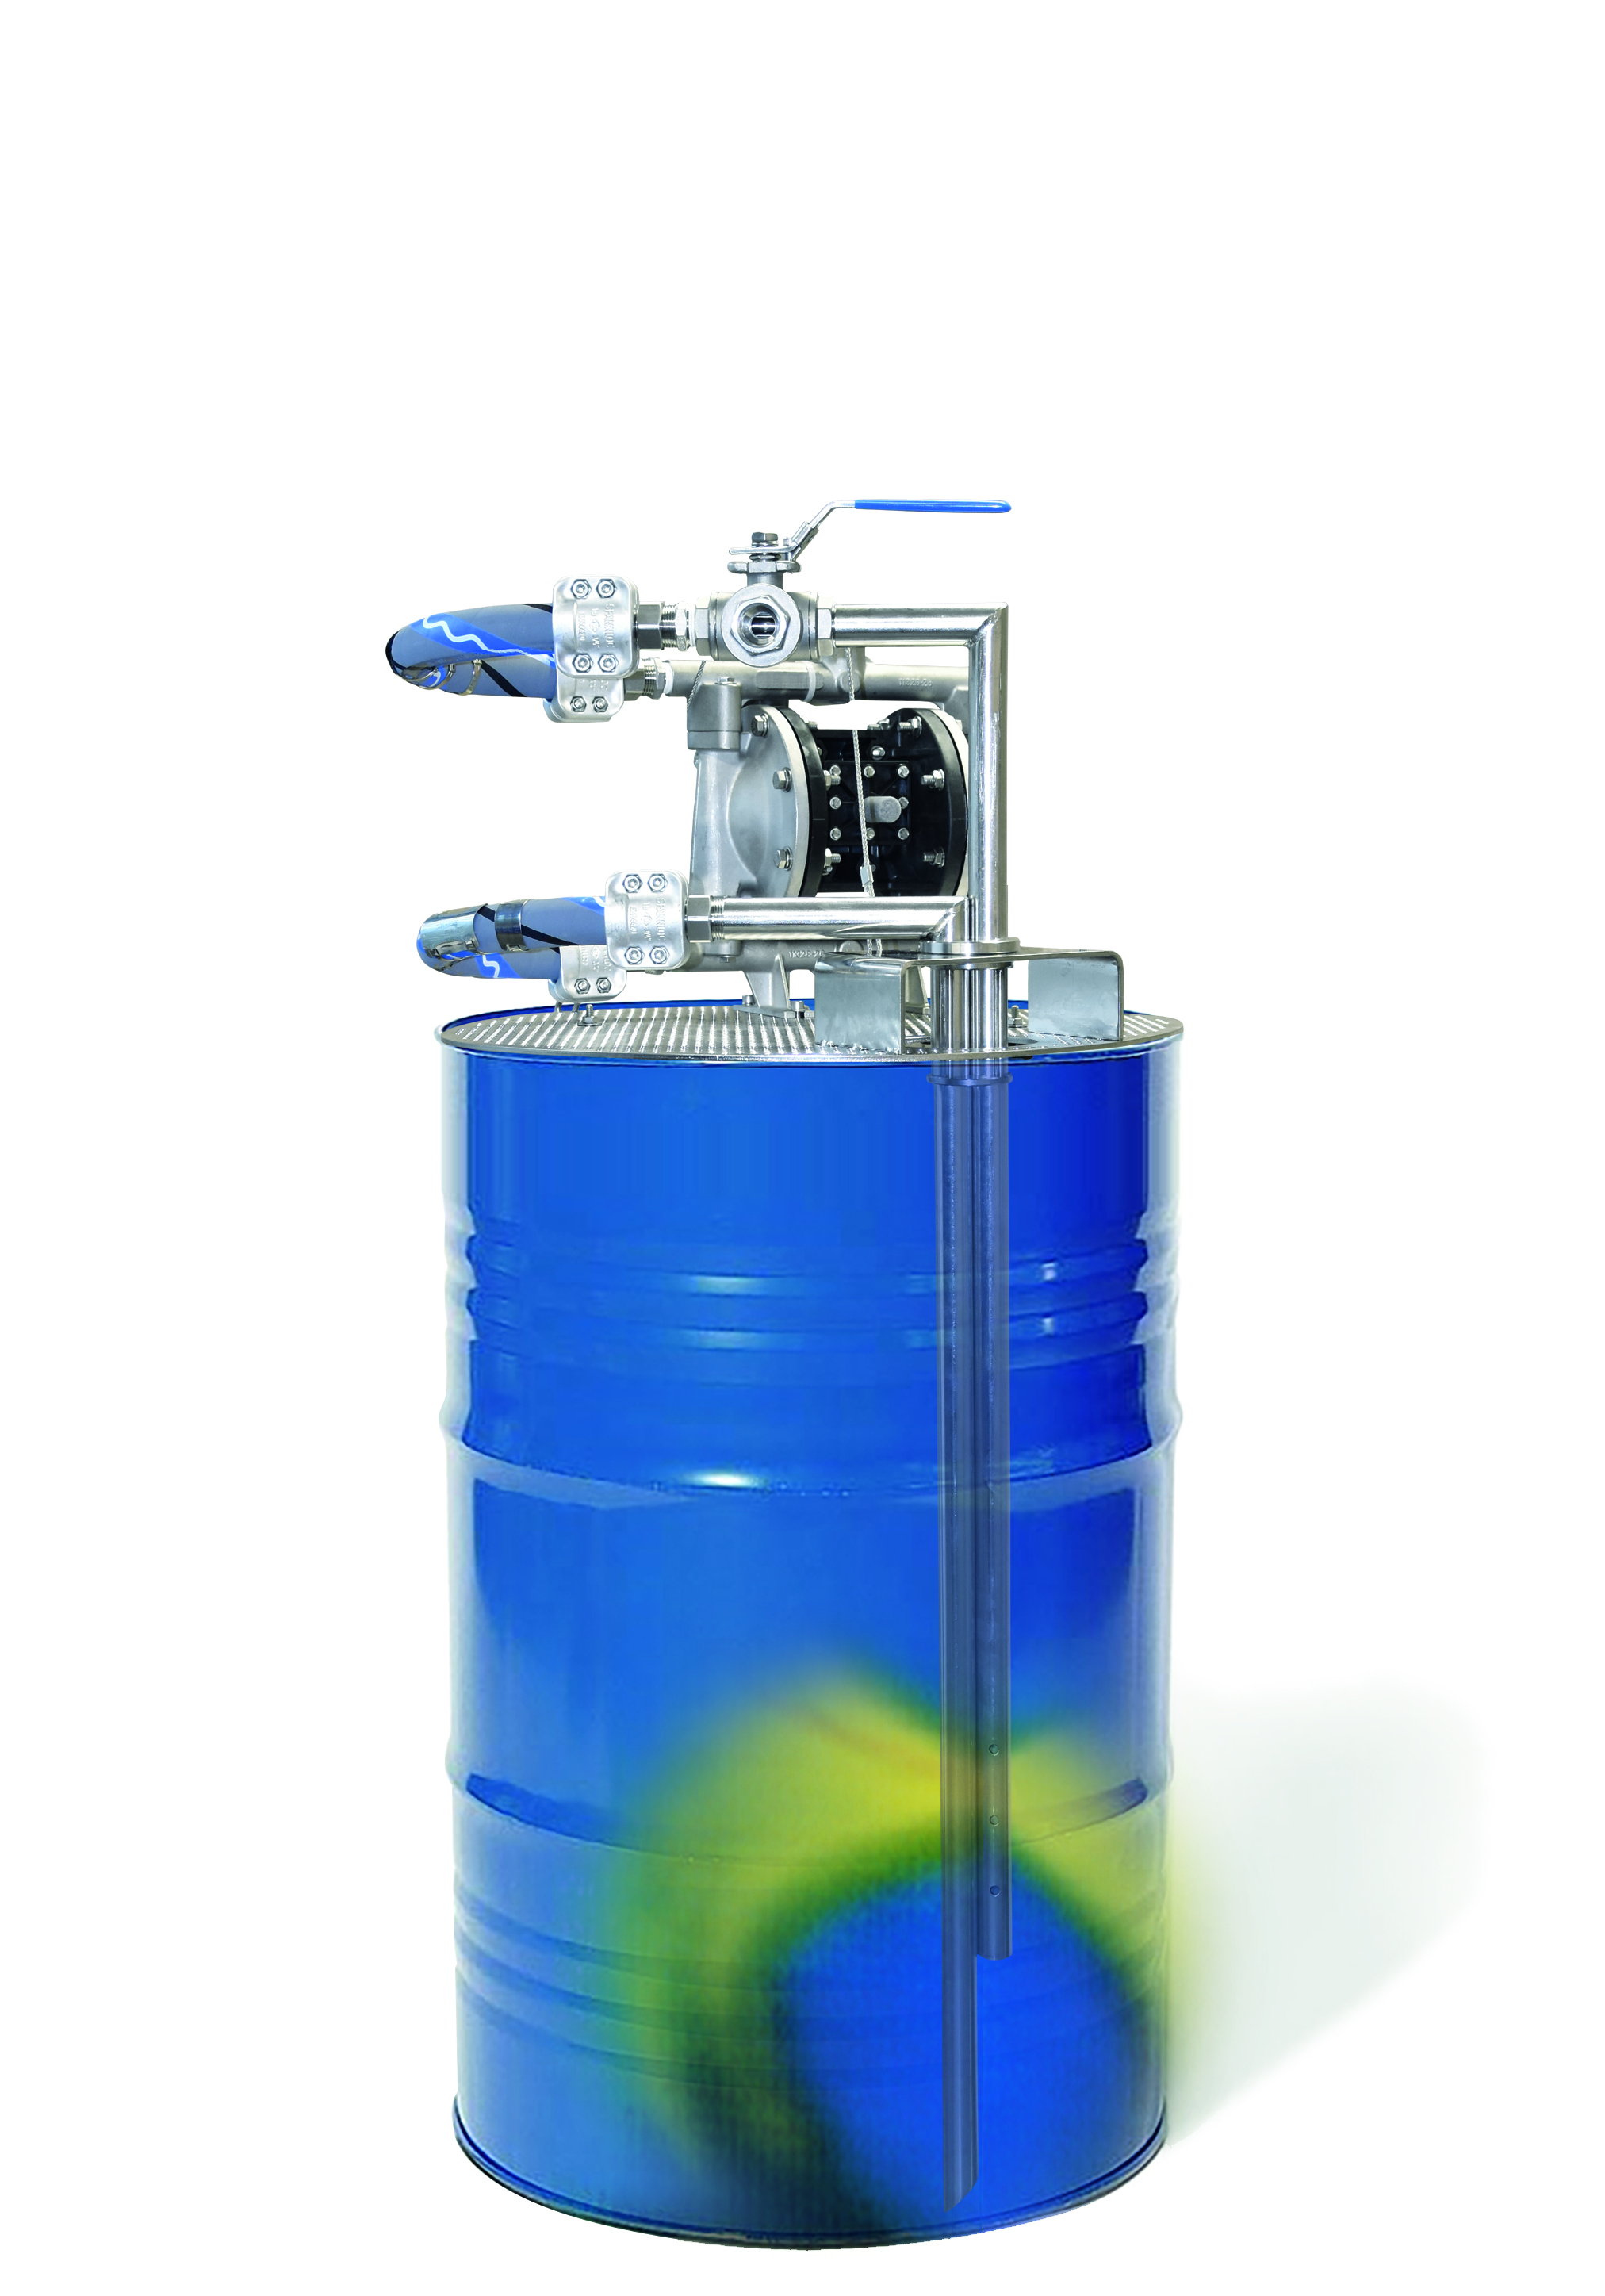 The mixing and pumping process is made via a suction and mixing tube and a 3-way ball valve.